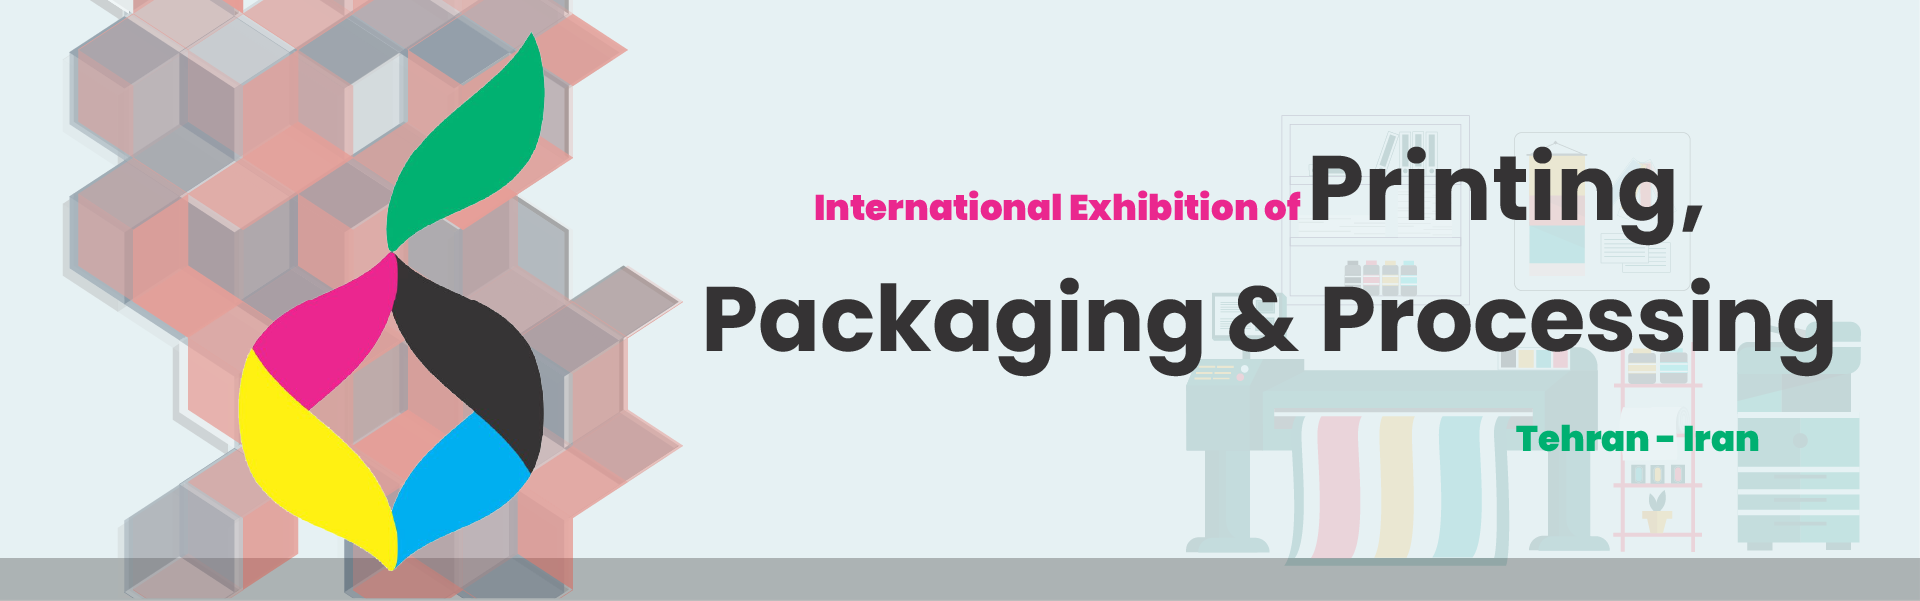 Printing and packaging industry food and processing machinery exhibition Tehran